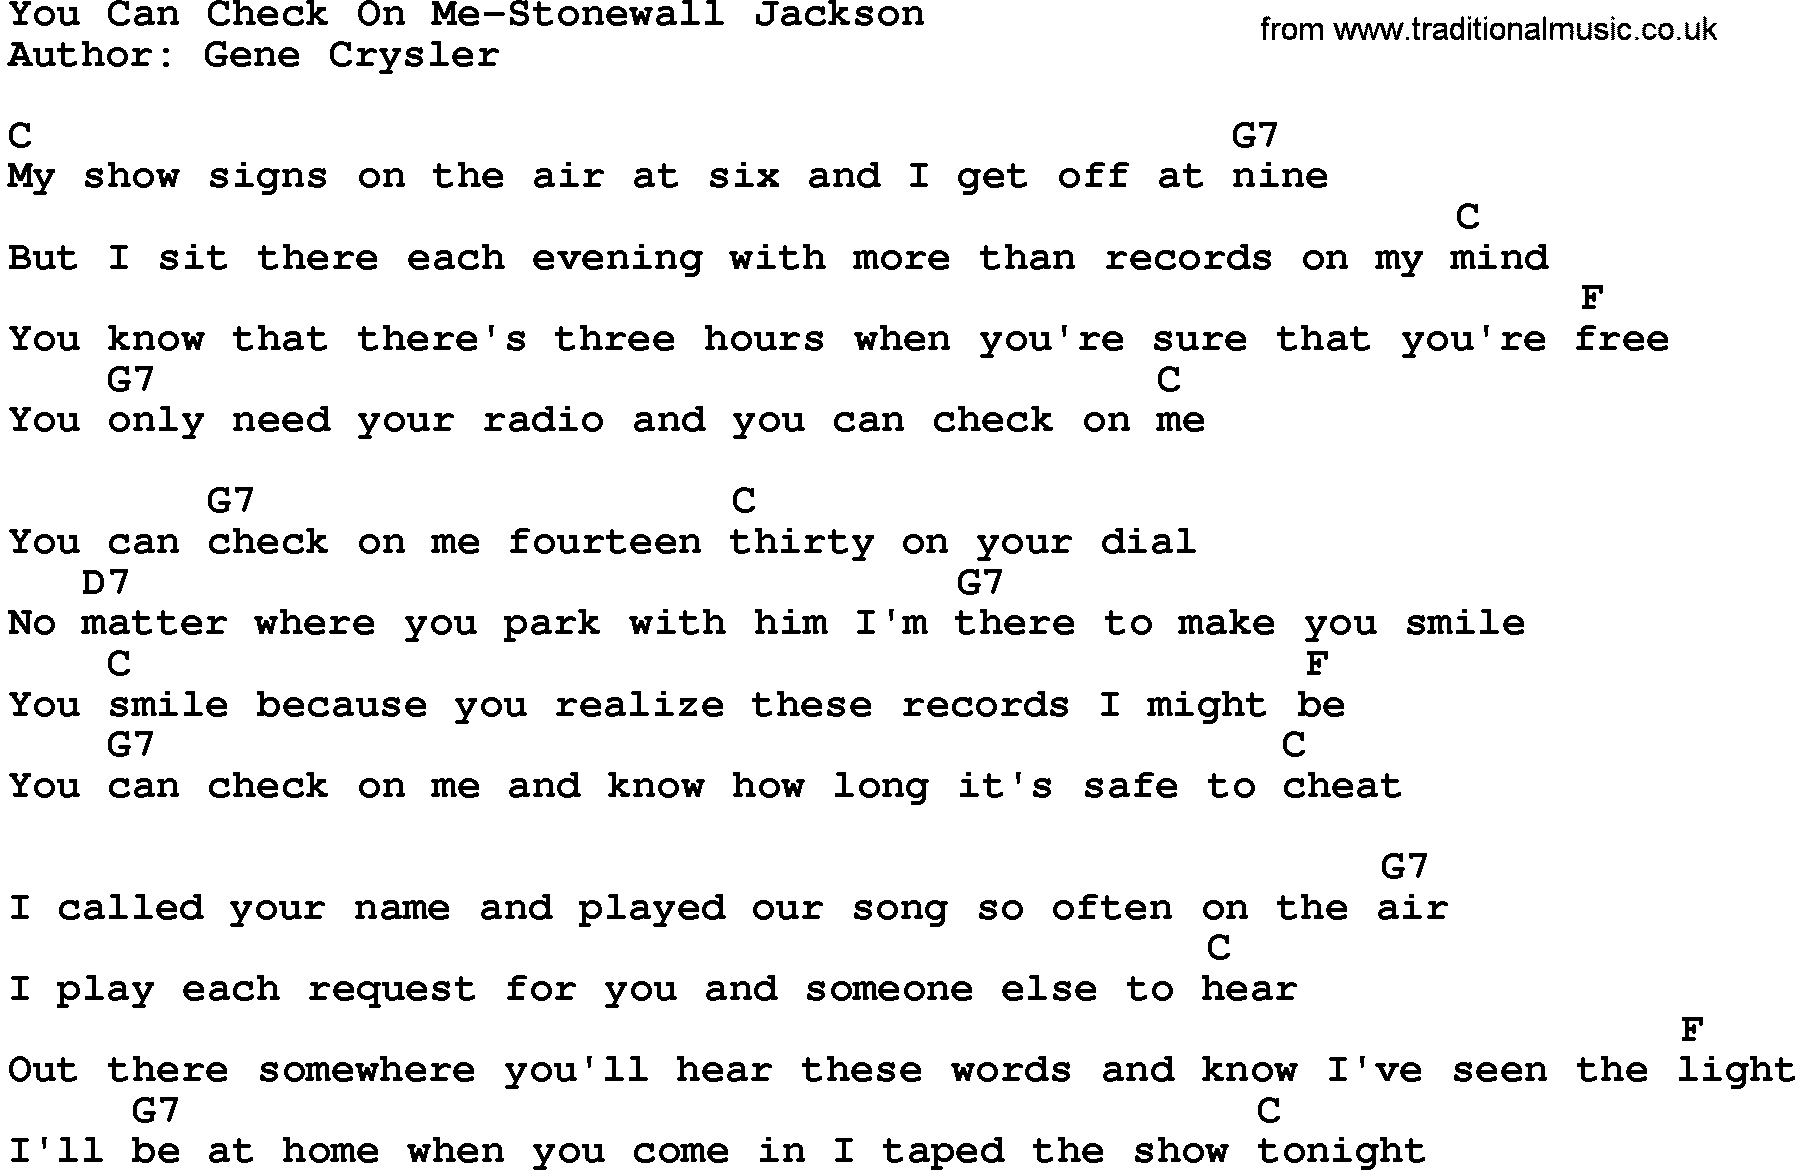 Country music song: You Can Check On Me-Stonewall Jackson lyrics and chords